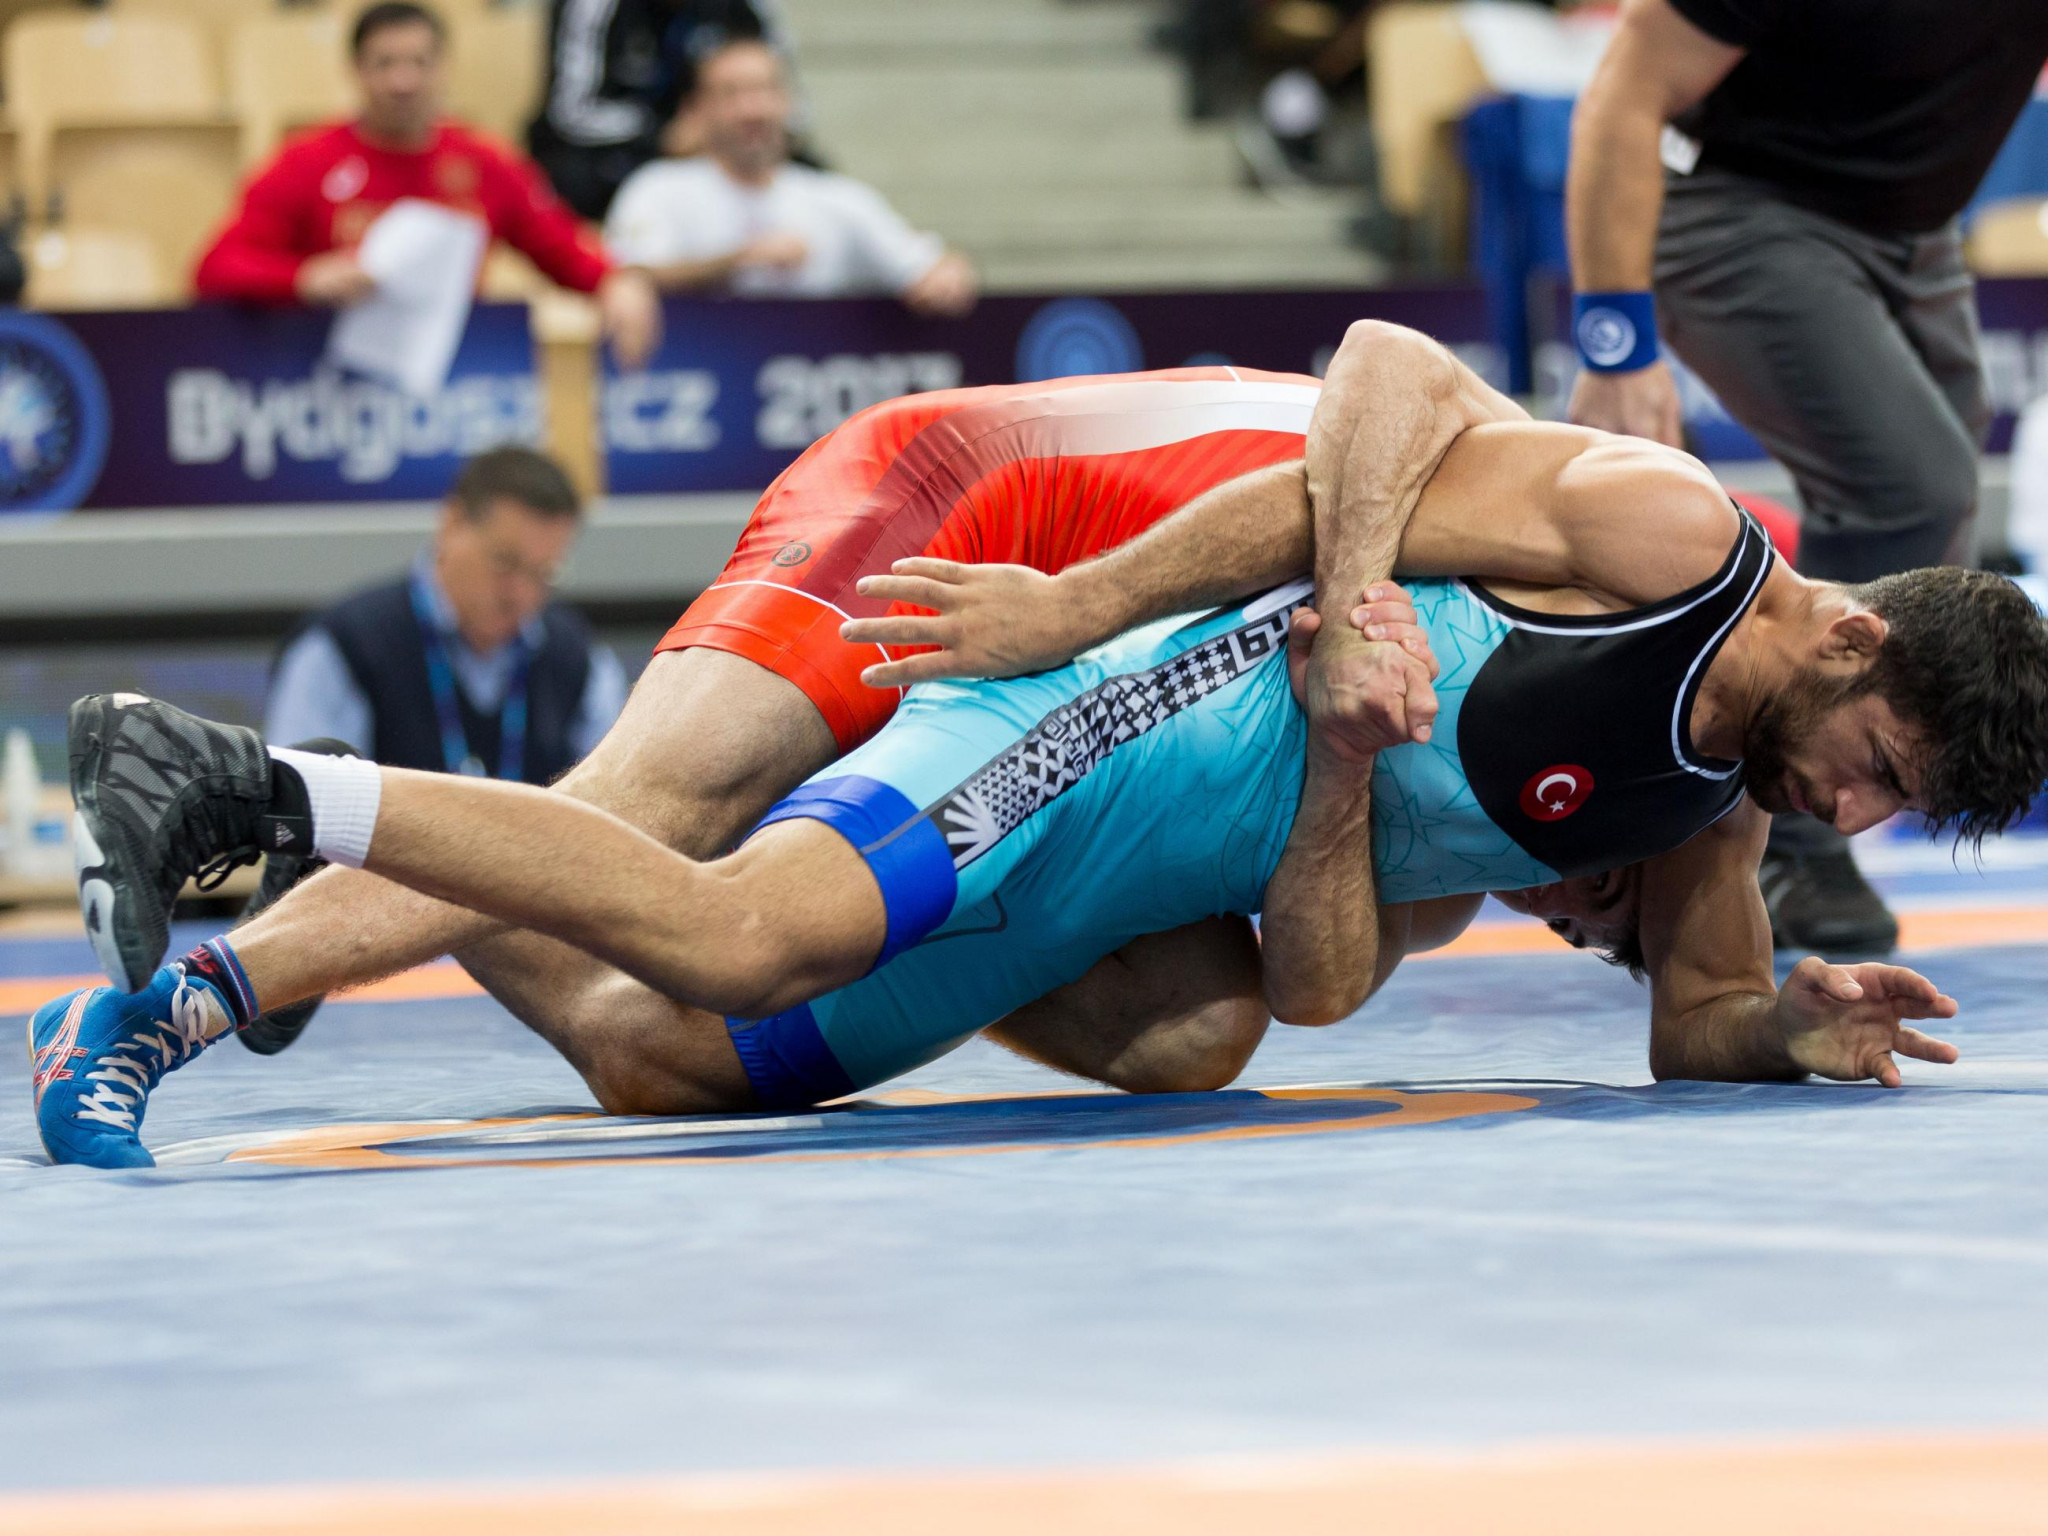 Semenov upsets the odds to beat Pataridze in 130kg event at the Under-23 World Wrestling Championships